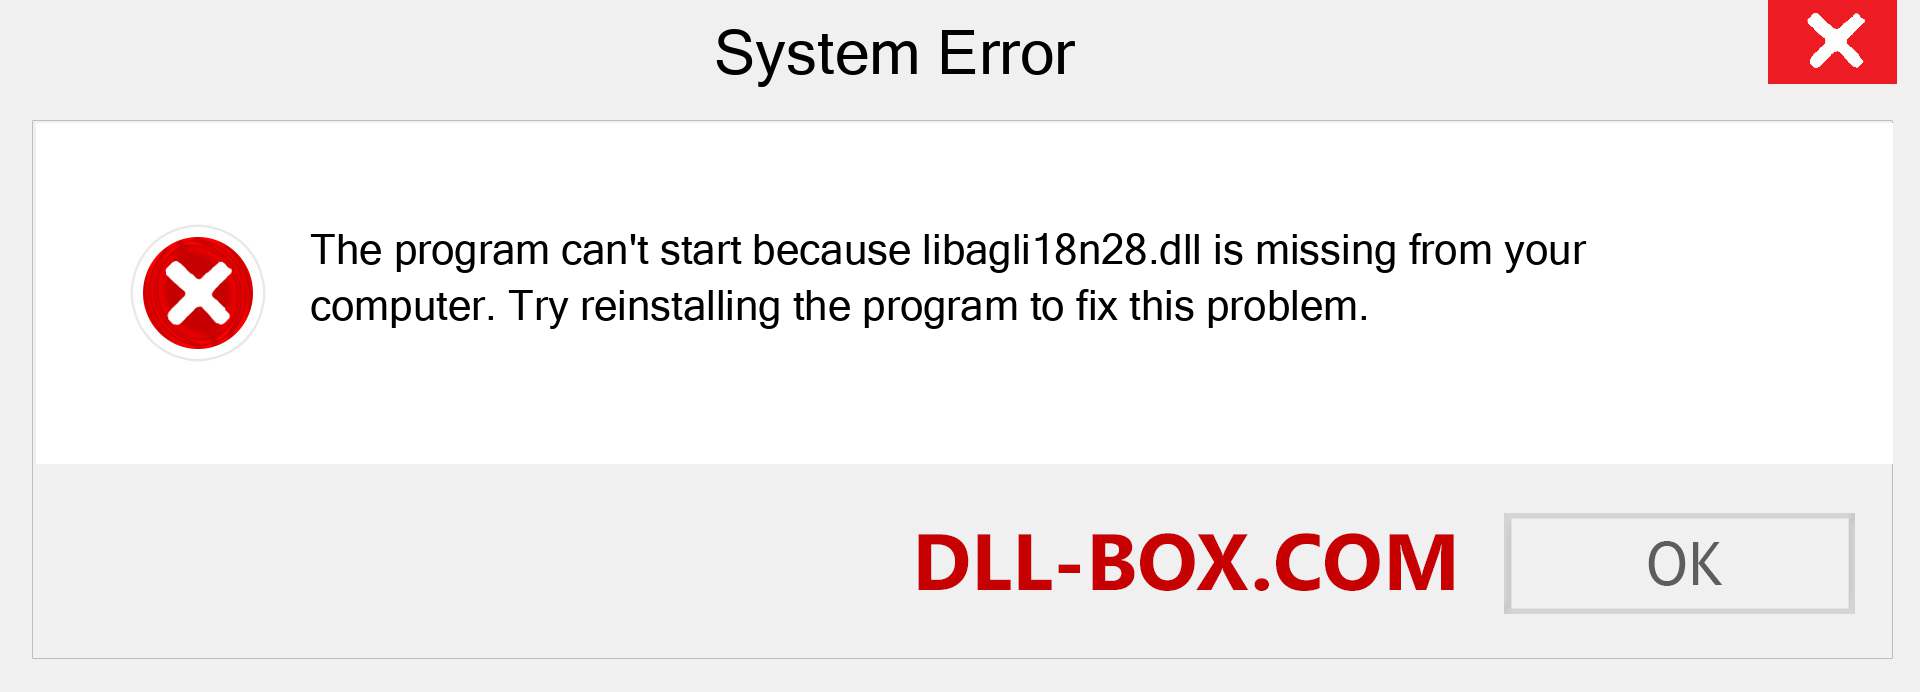  libagli18n28.dll file is missing?. Download for Windows 7, 8, 10 - Fix  libagli18n28 dll Missing Error on Windows, photos, images